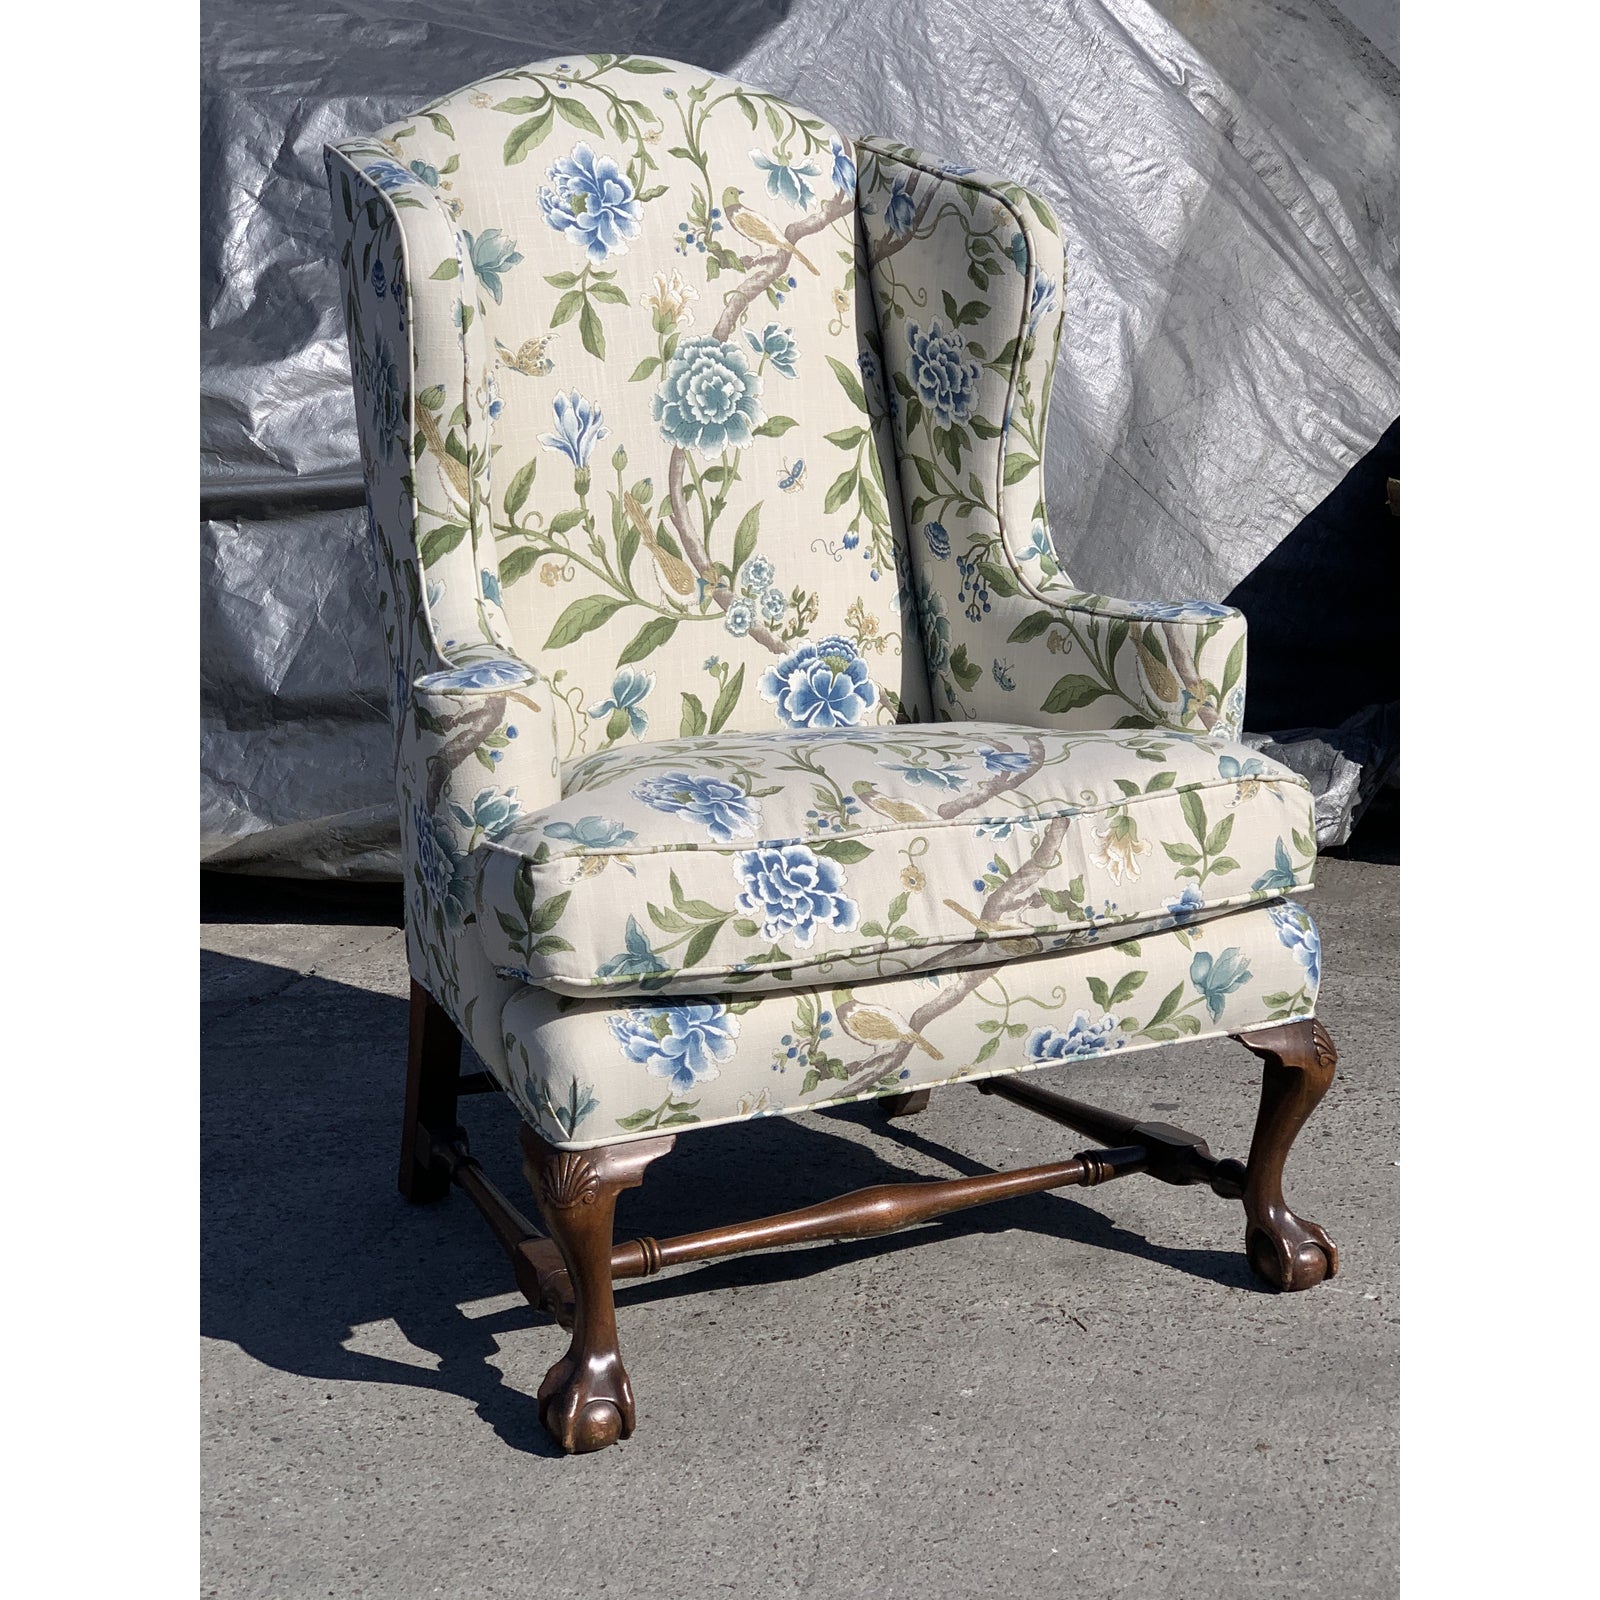 english-style-traditional-wingback-chair-floral-motif-4417